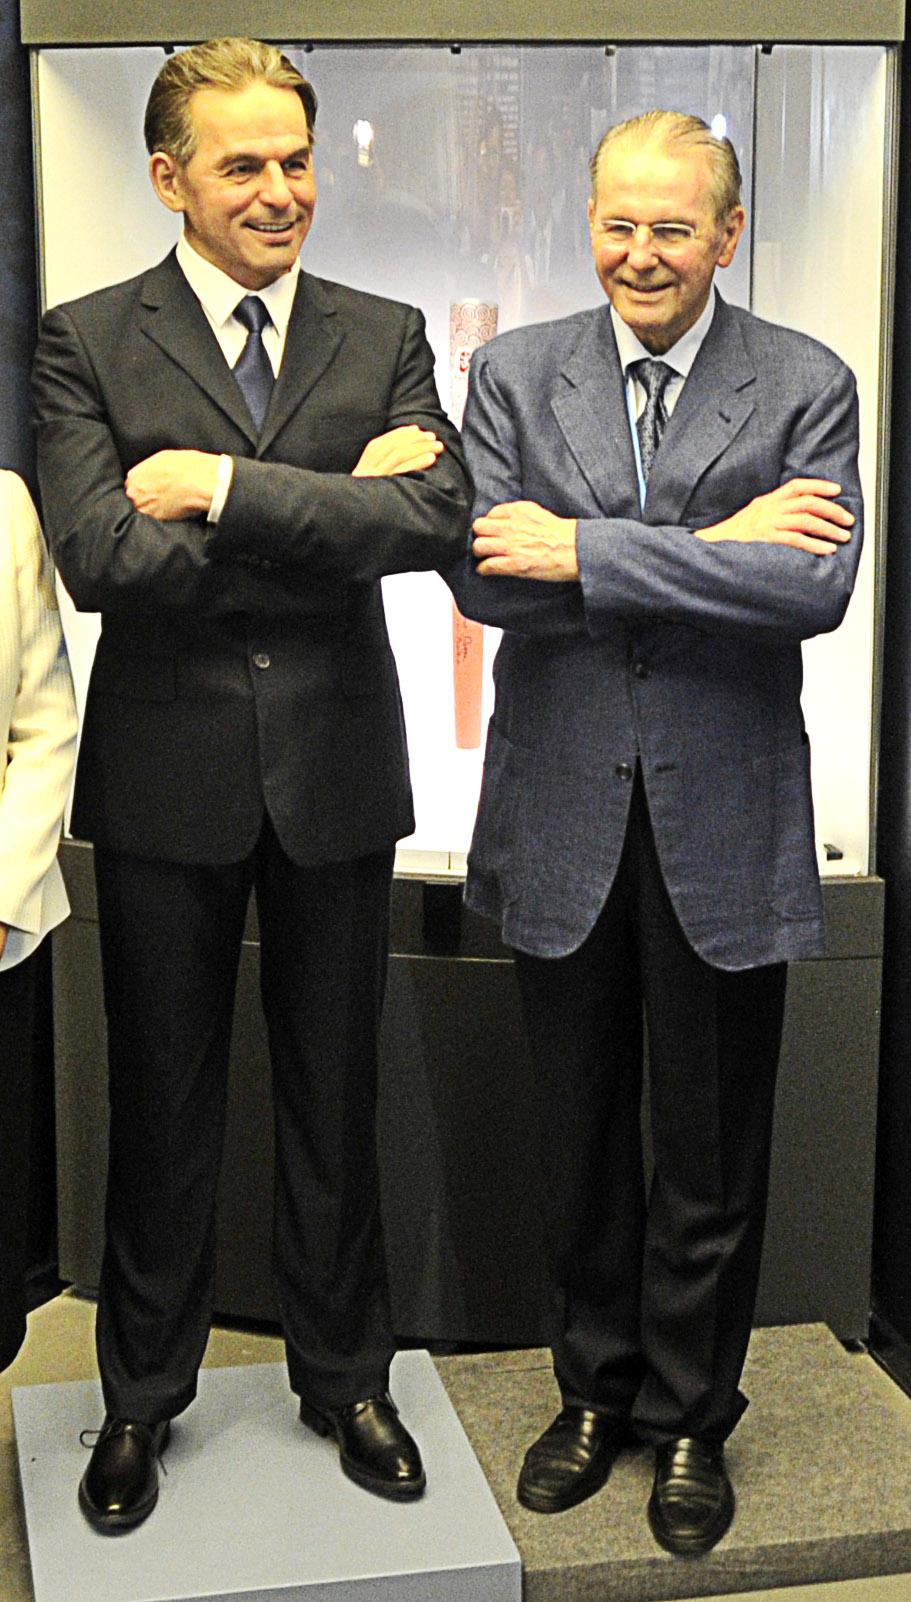 Former IOC chief Jacques Rogge posed behind a waxwork...of himself ©Nanjing 2014